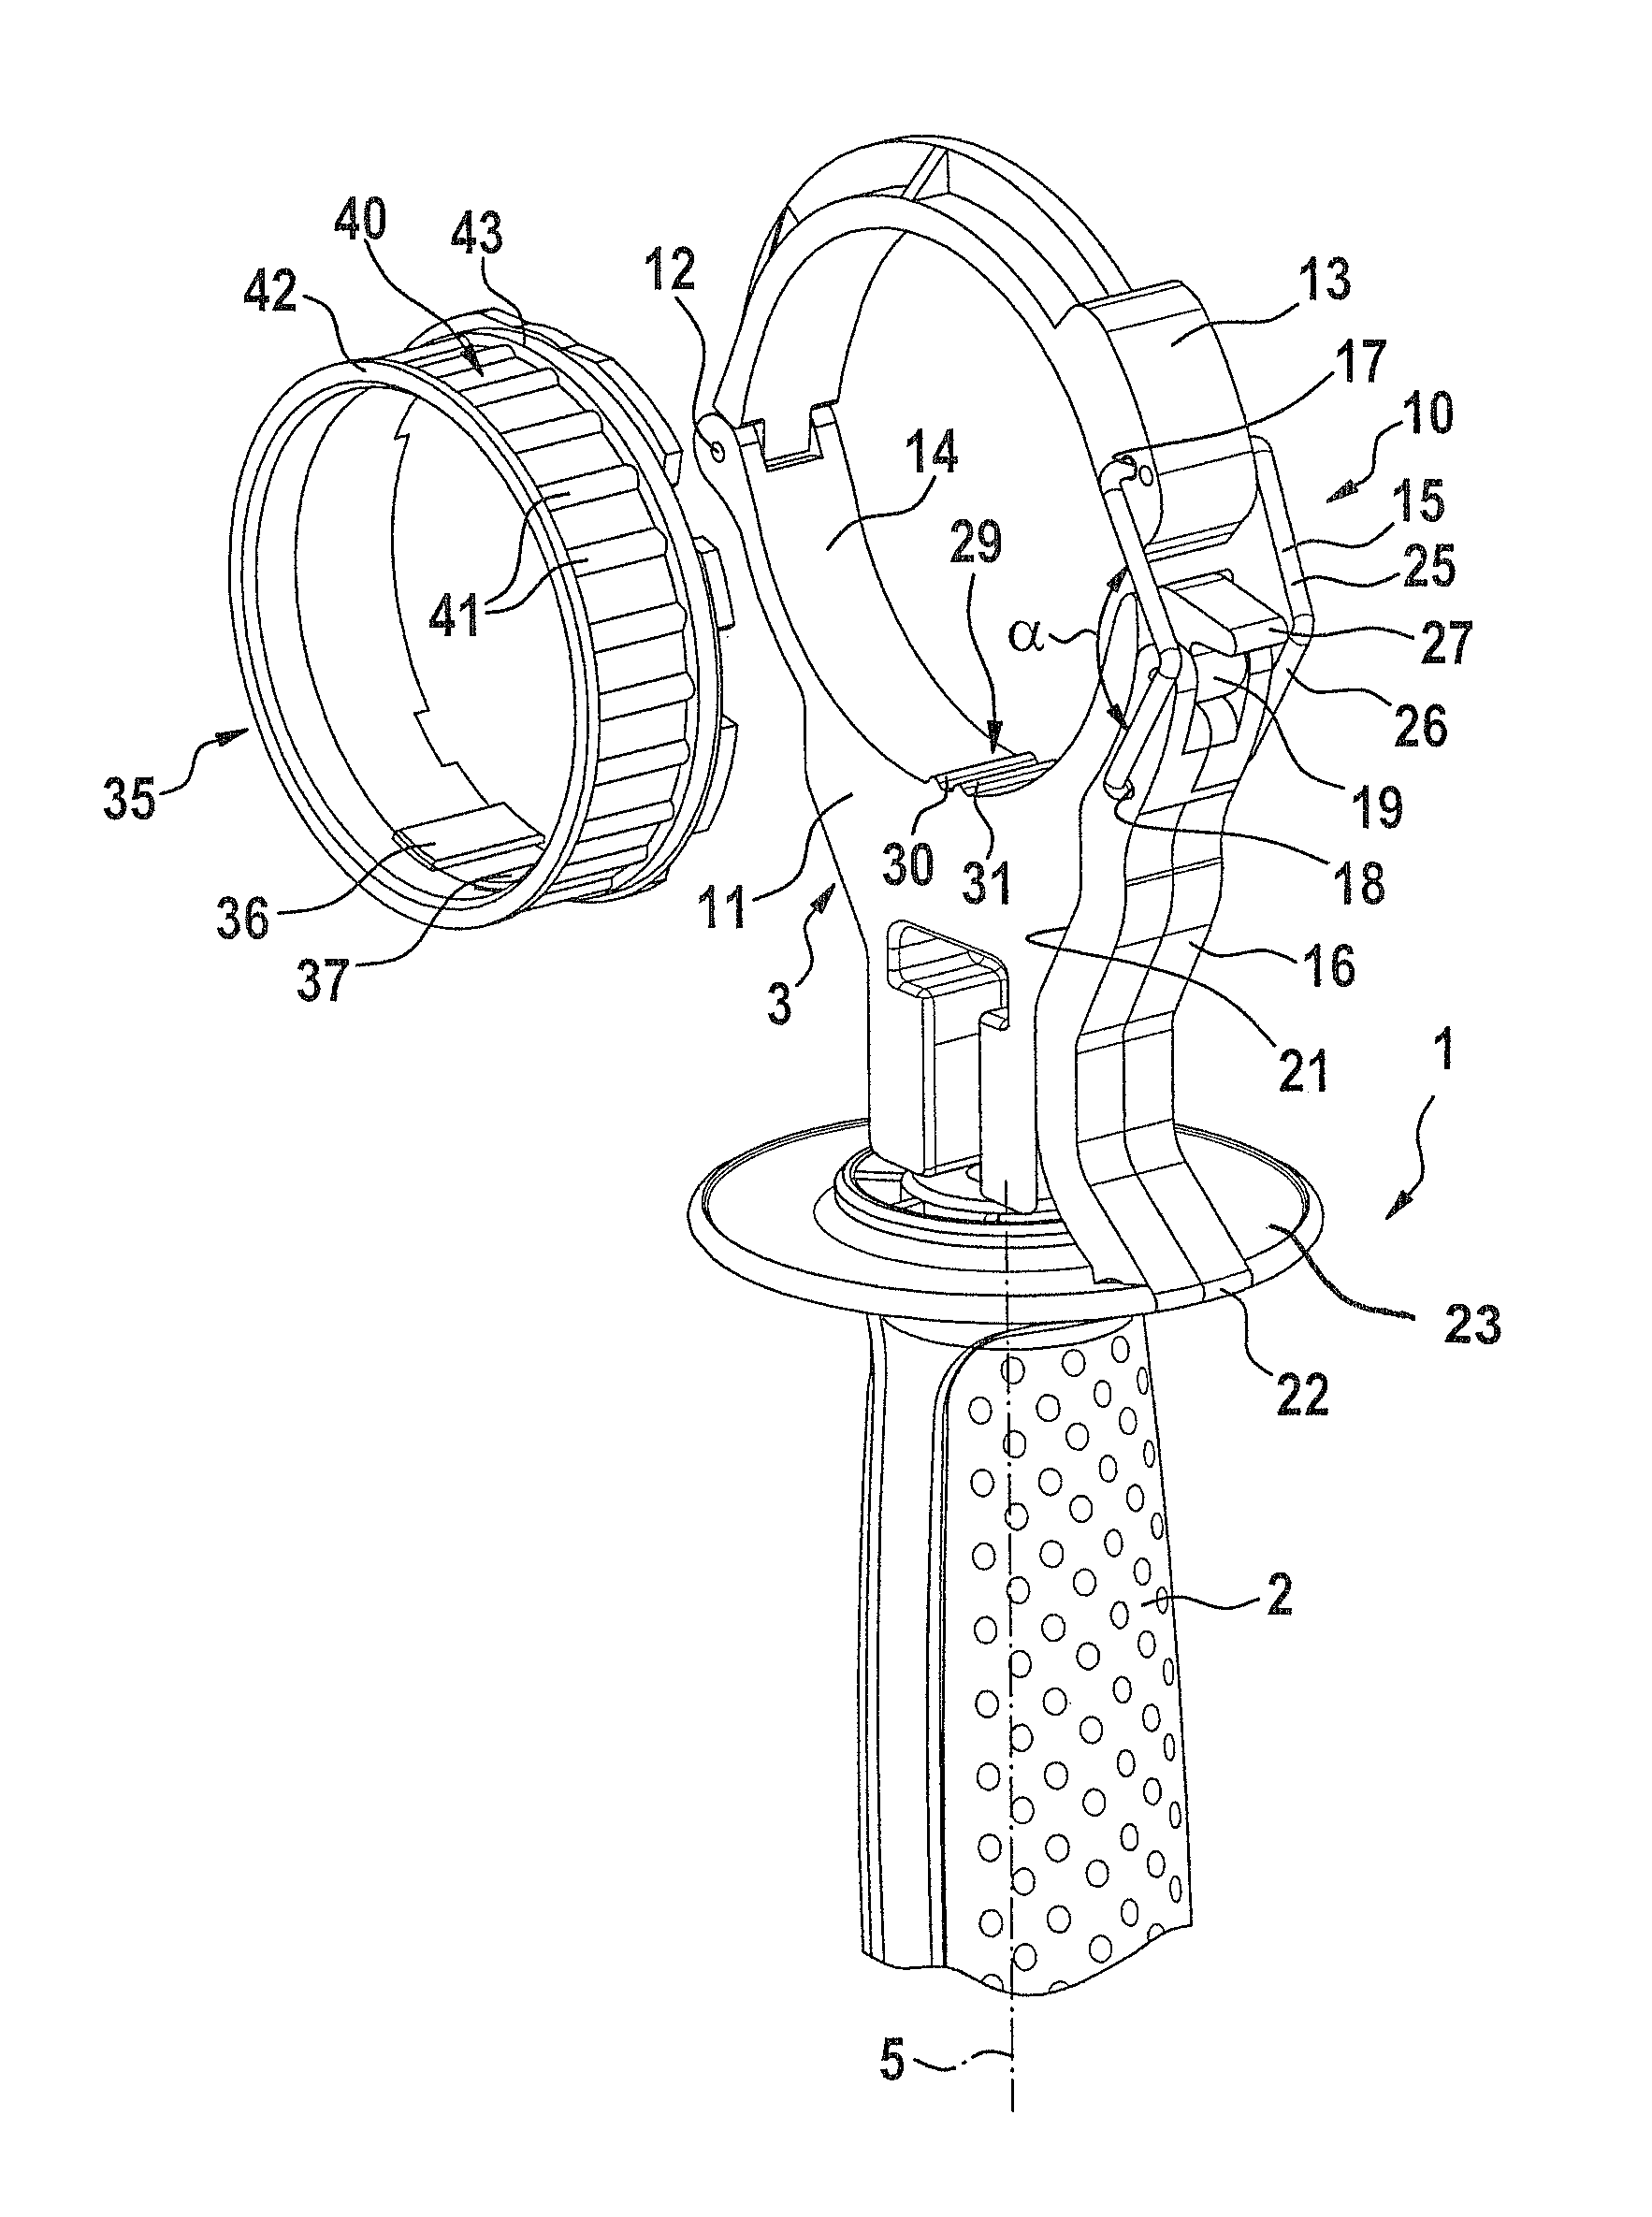 Apparatus for fastening a handle on a power tool